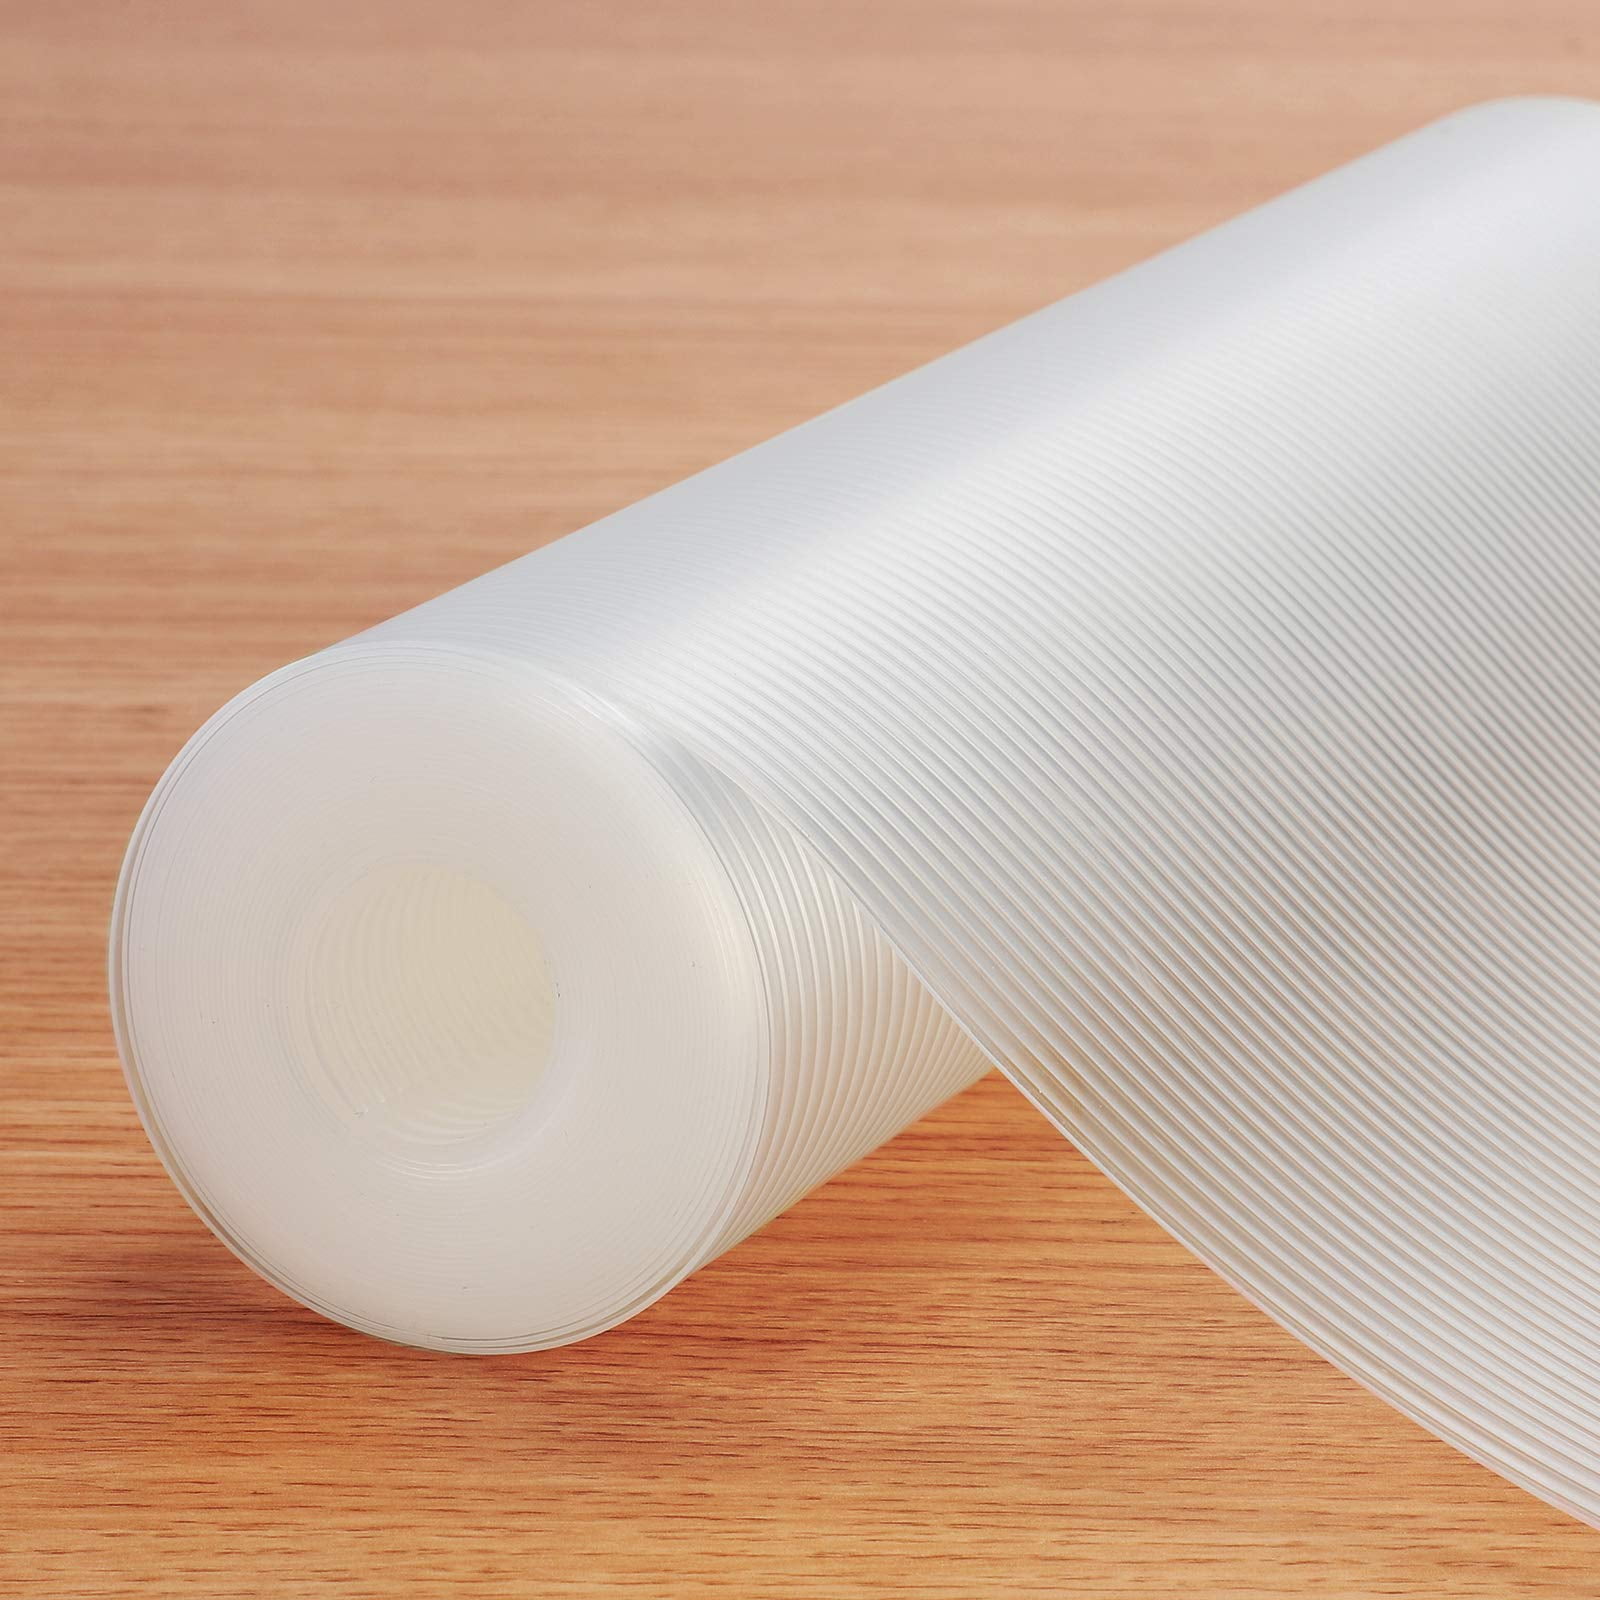 Clear Plastic Shelf Liner, Non-Adhesive Roll for Kitchen, Fridge, Pantry,  Drawers (17.5 In x 20 Ft)